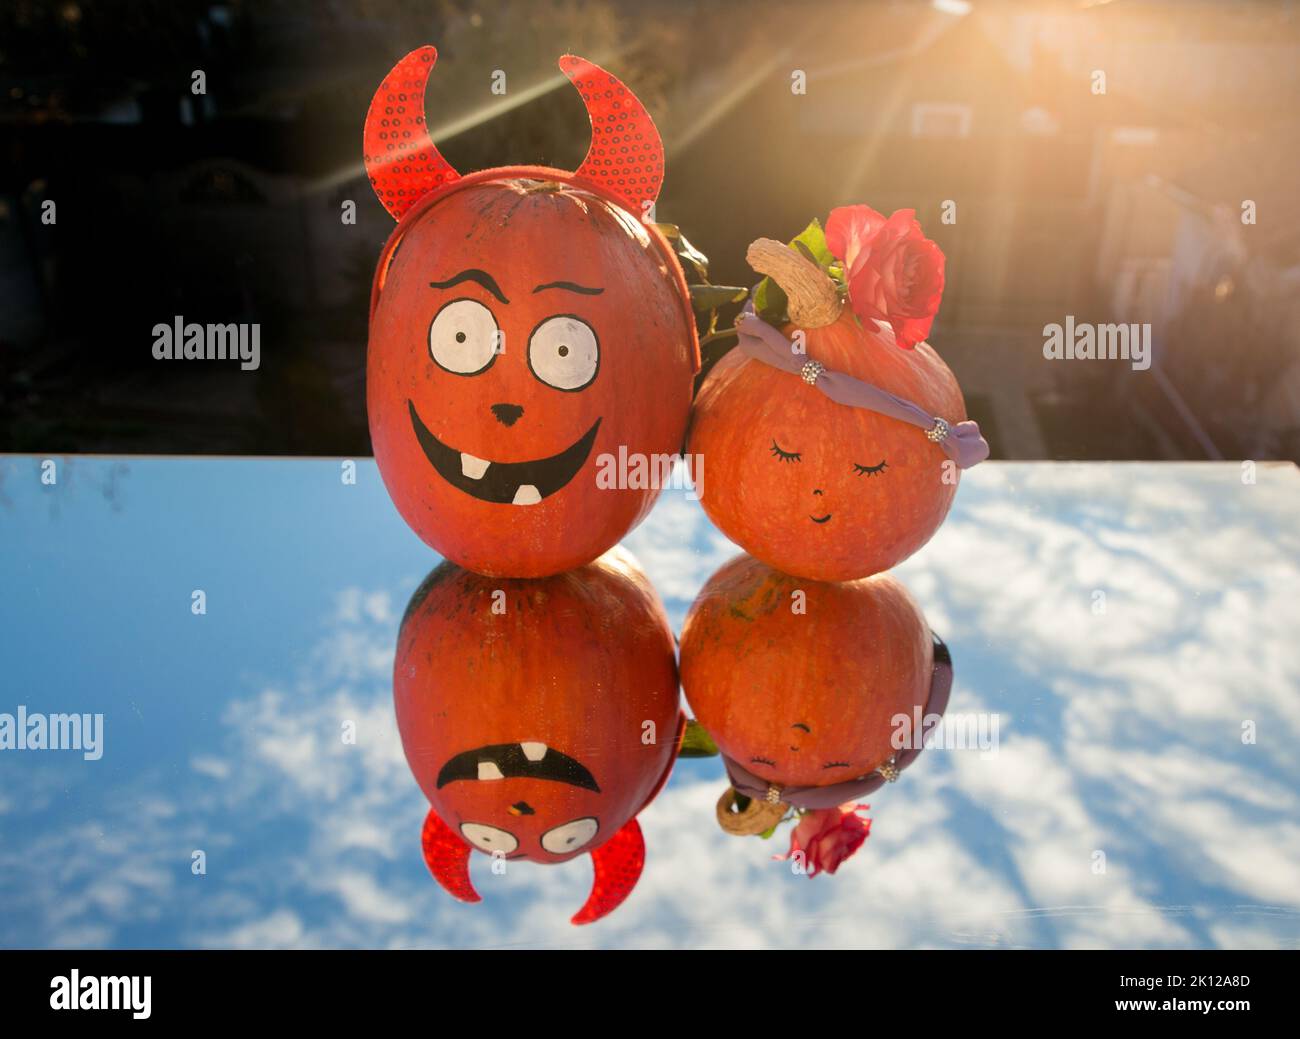 two beautiful orange pumpkins with a painted Halloween face stand on a mirror reflecting the blue sky, backlit by setting sun. preparing for Halloween Stock Photo